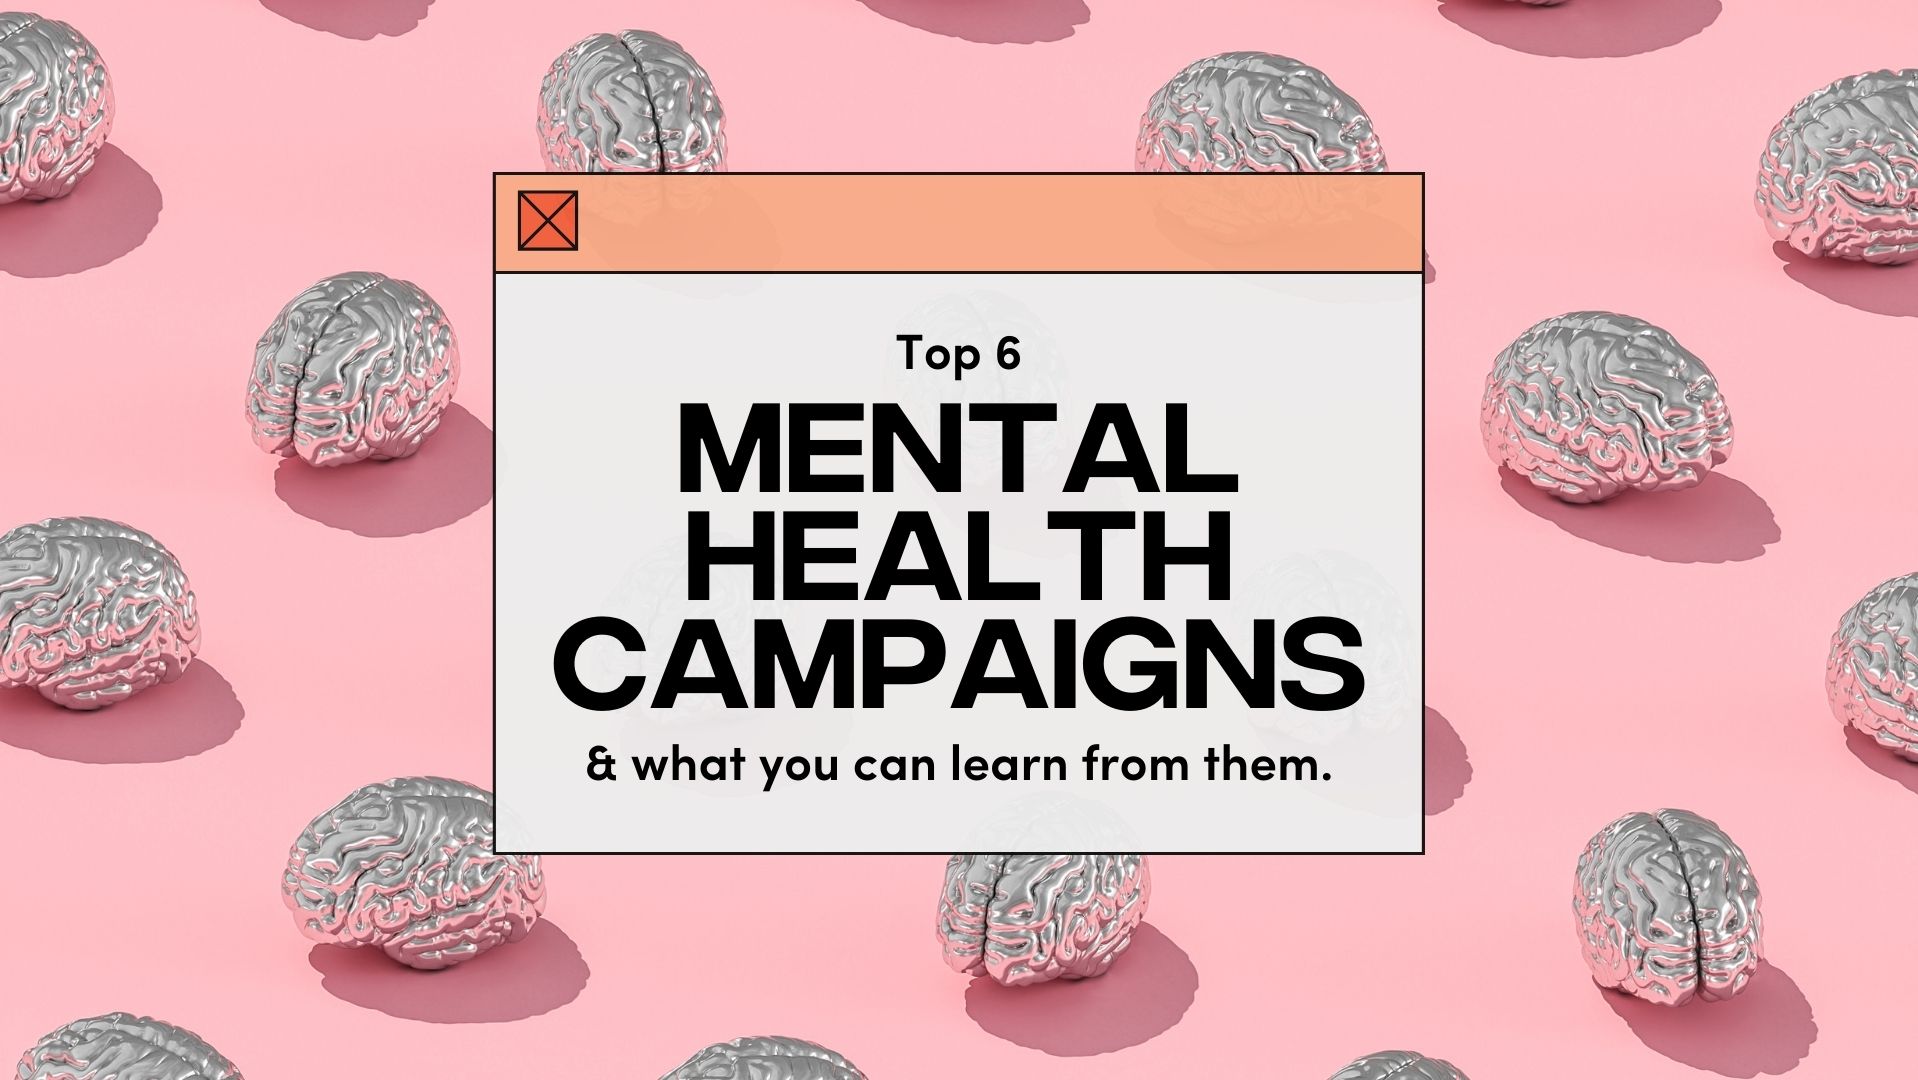 Top 6 Mental Health Campaigns & What You Can Learn From Them